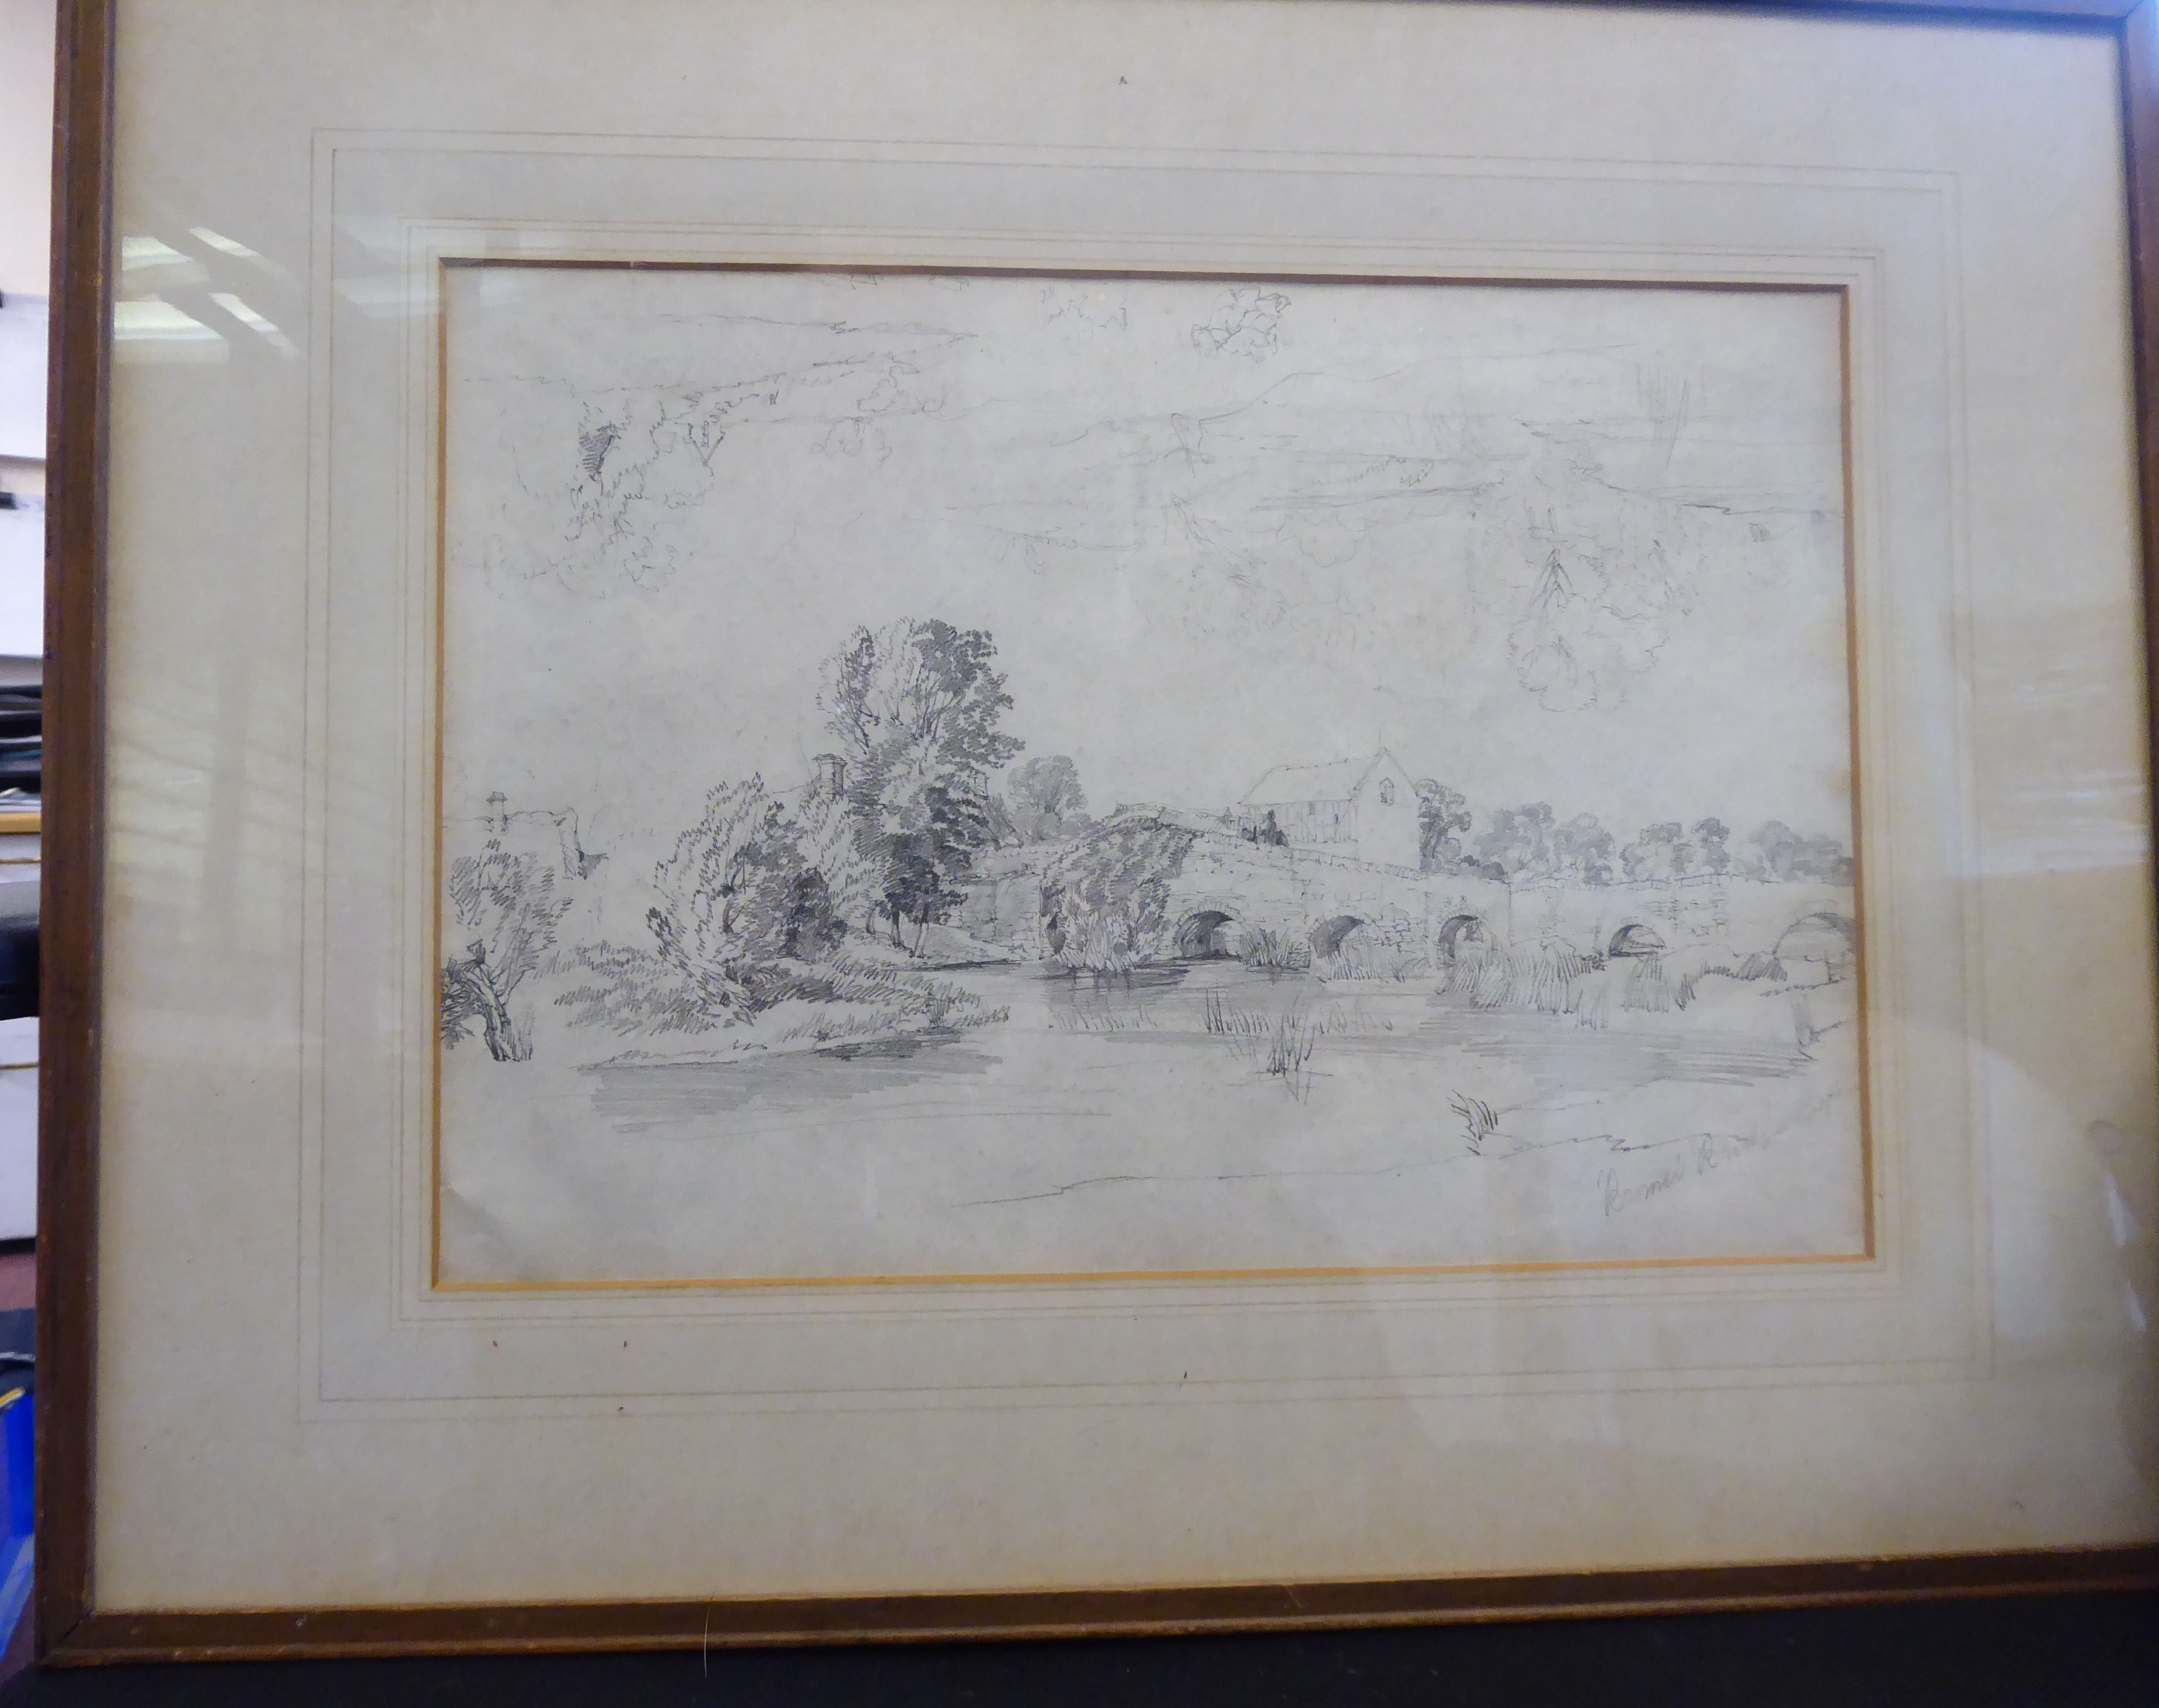 Attributed to James Duffield Hardy - 'Barnet Bridge' pencil studies 9'' x 13'' framed - Image 3 of 4